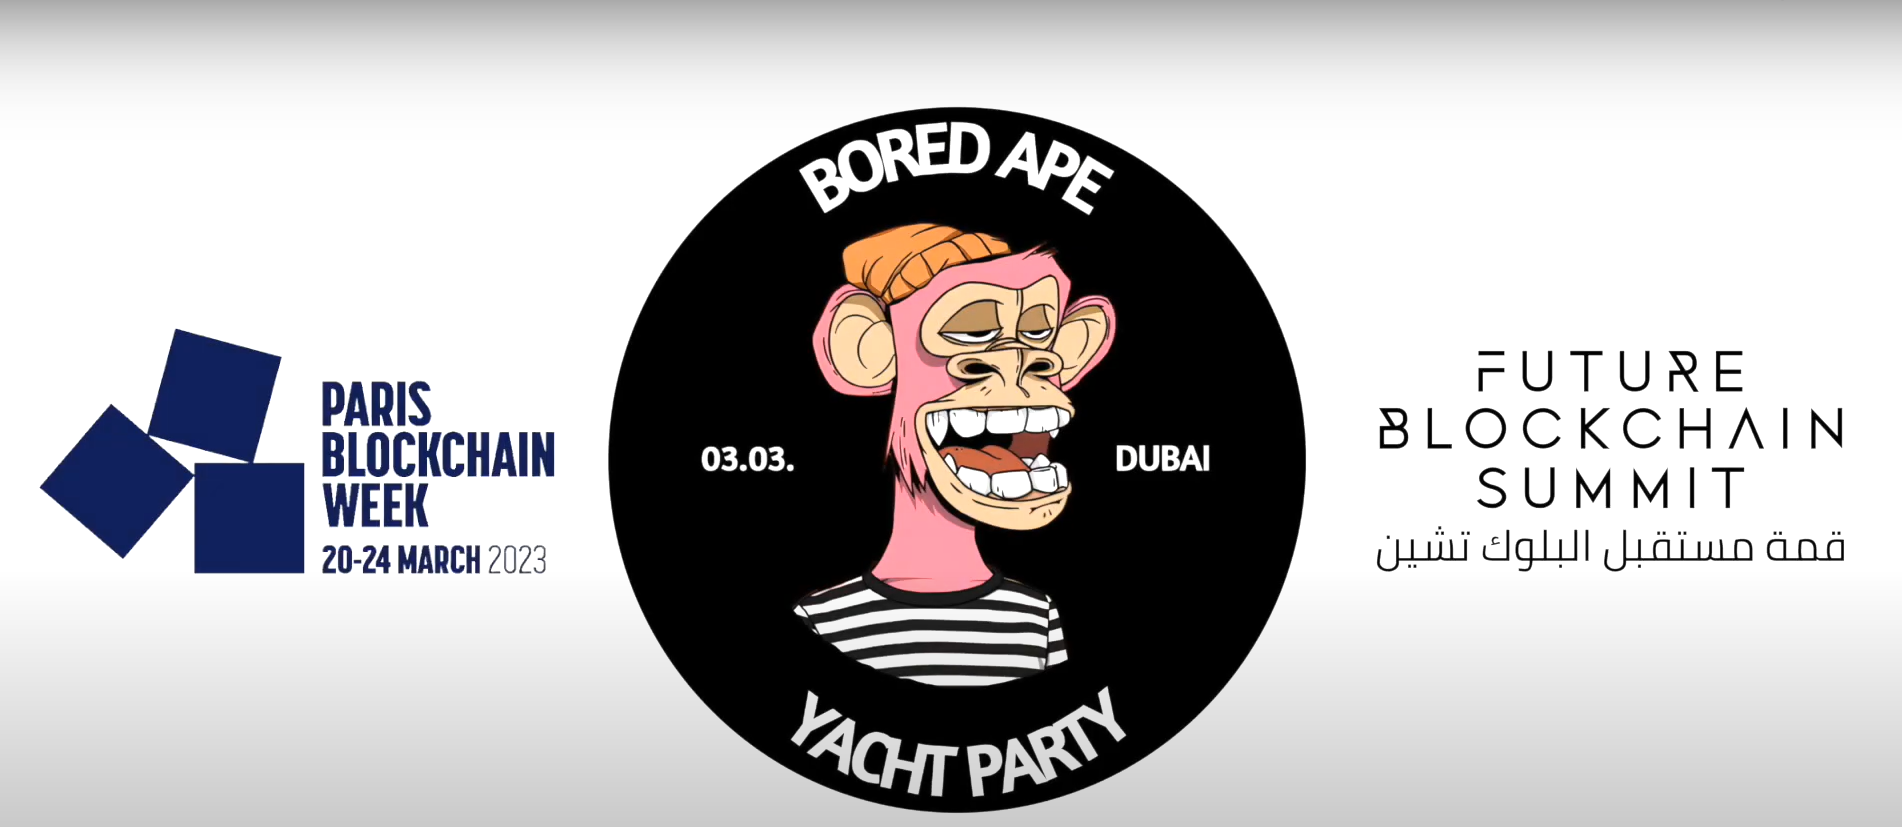 FIRST-EVER BORED APE YACHT PARTY IN THE UAE